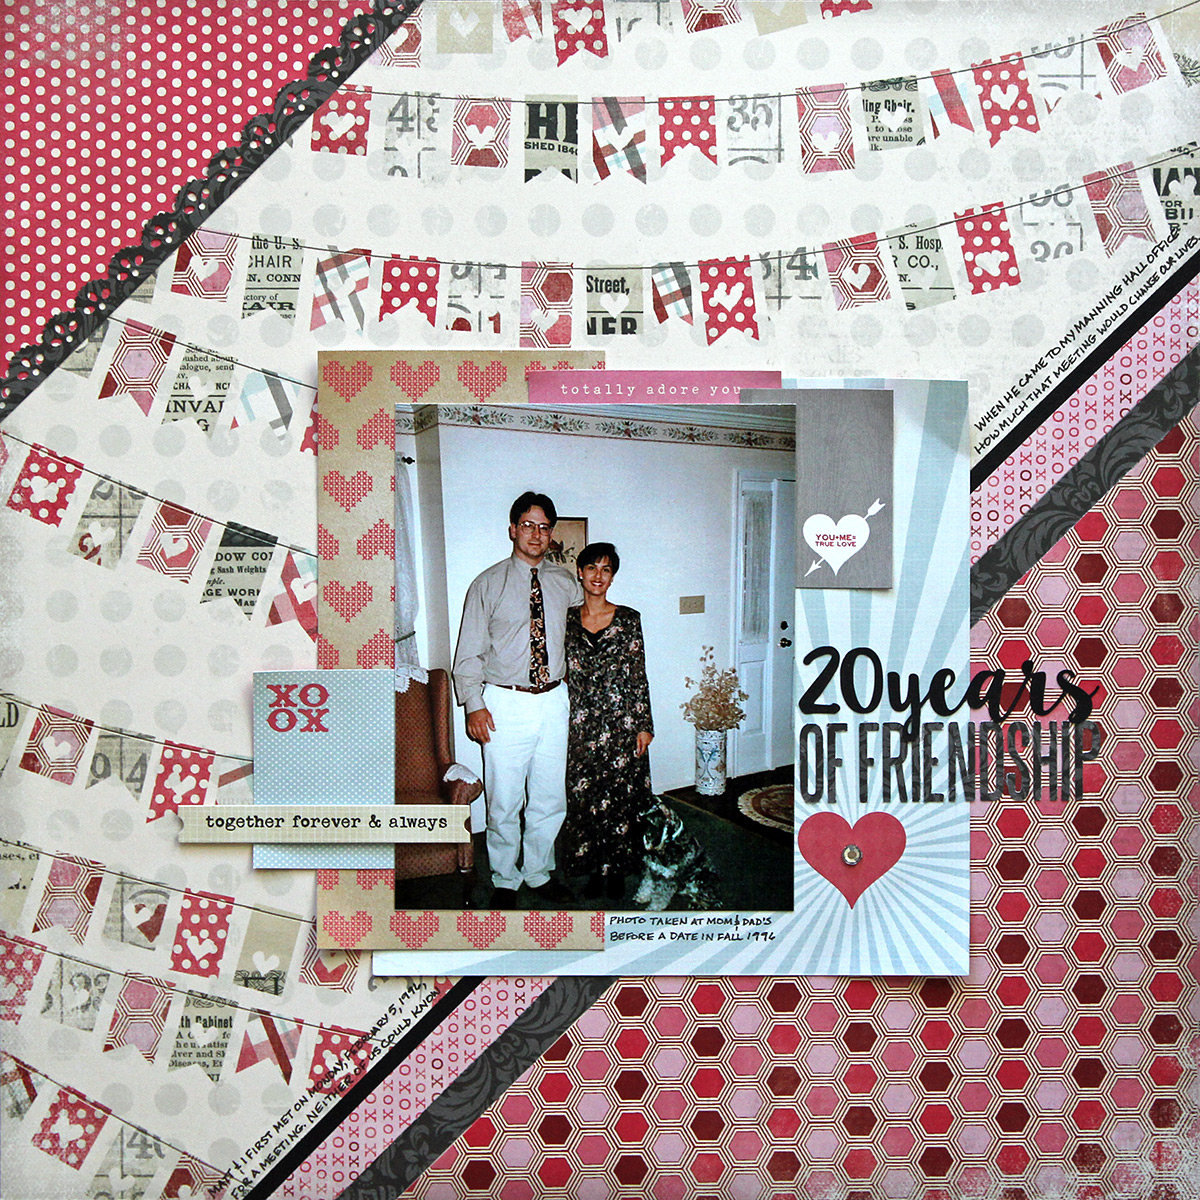 20 years of friendship is a one-photo scrapbook page based on the Let's Get Sketchy February 1st sketch.